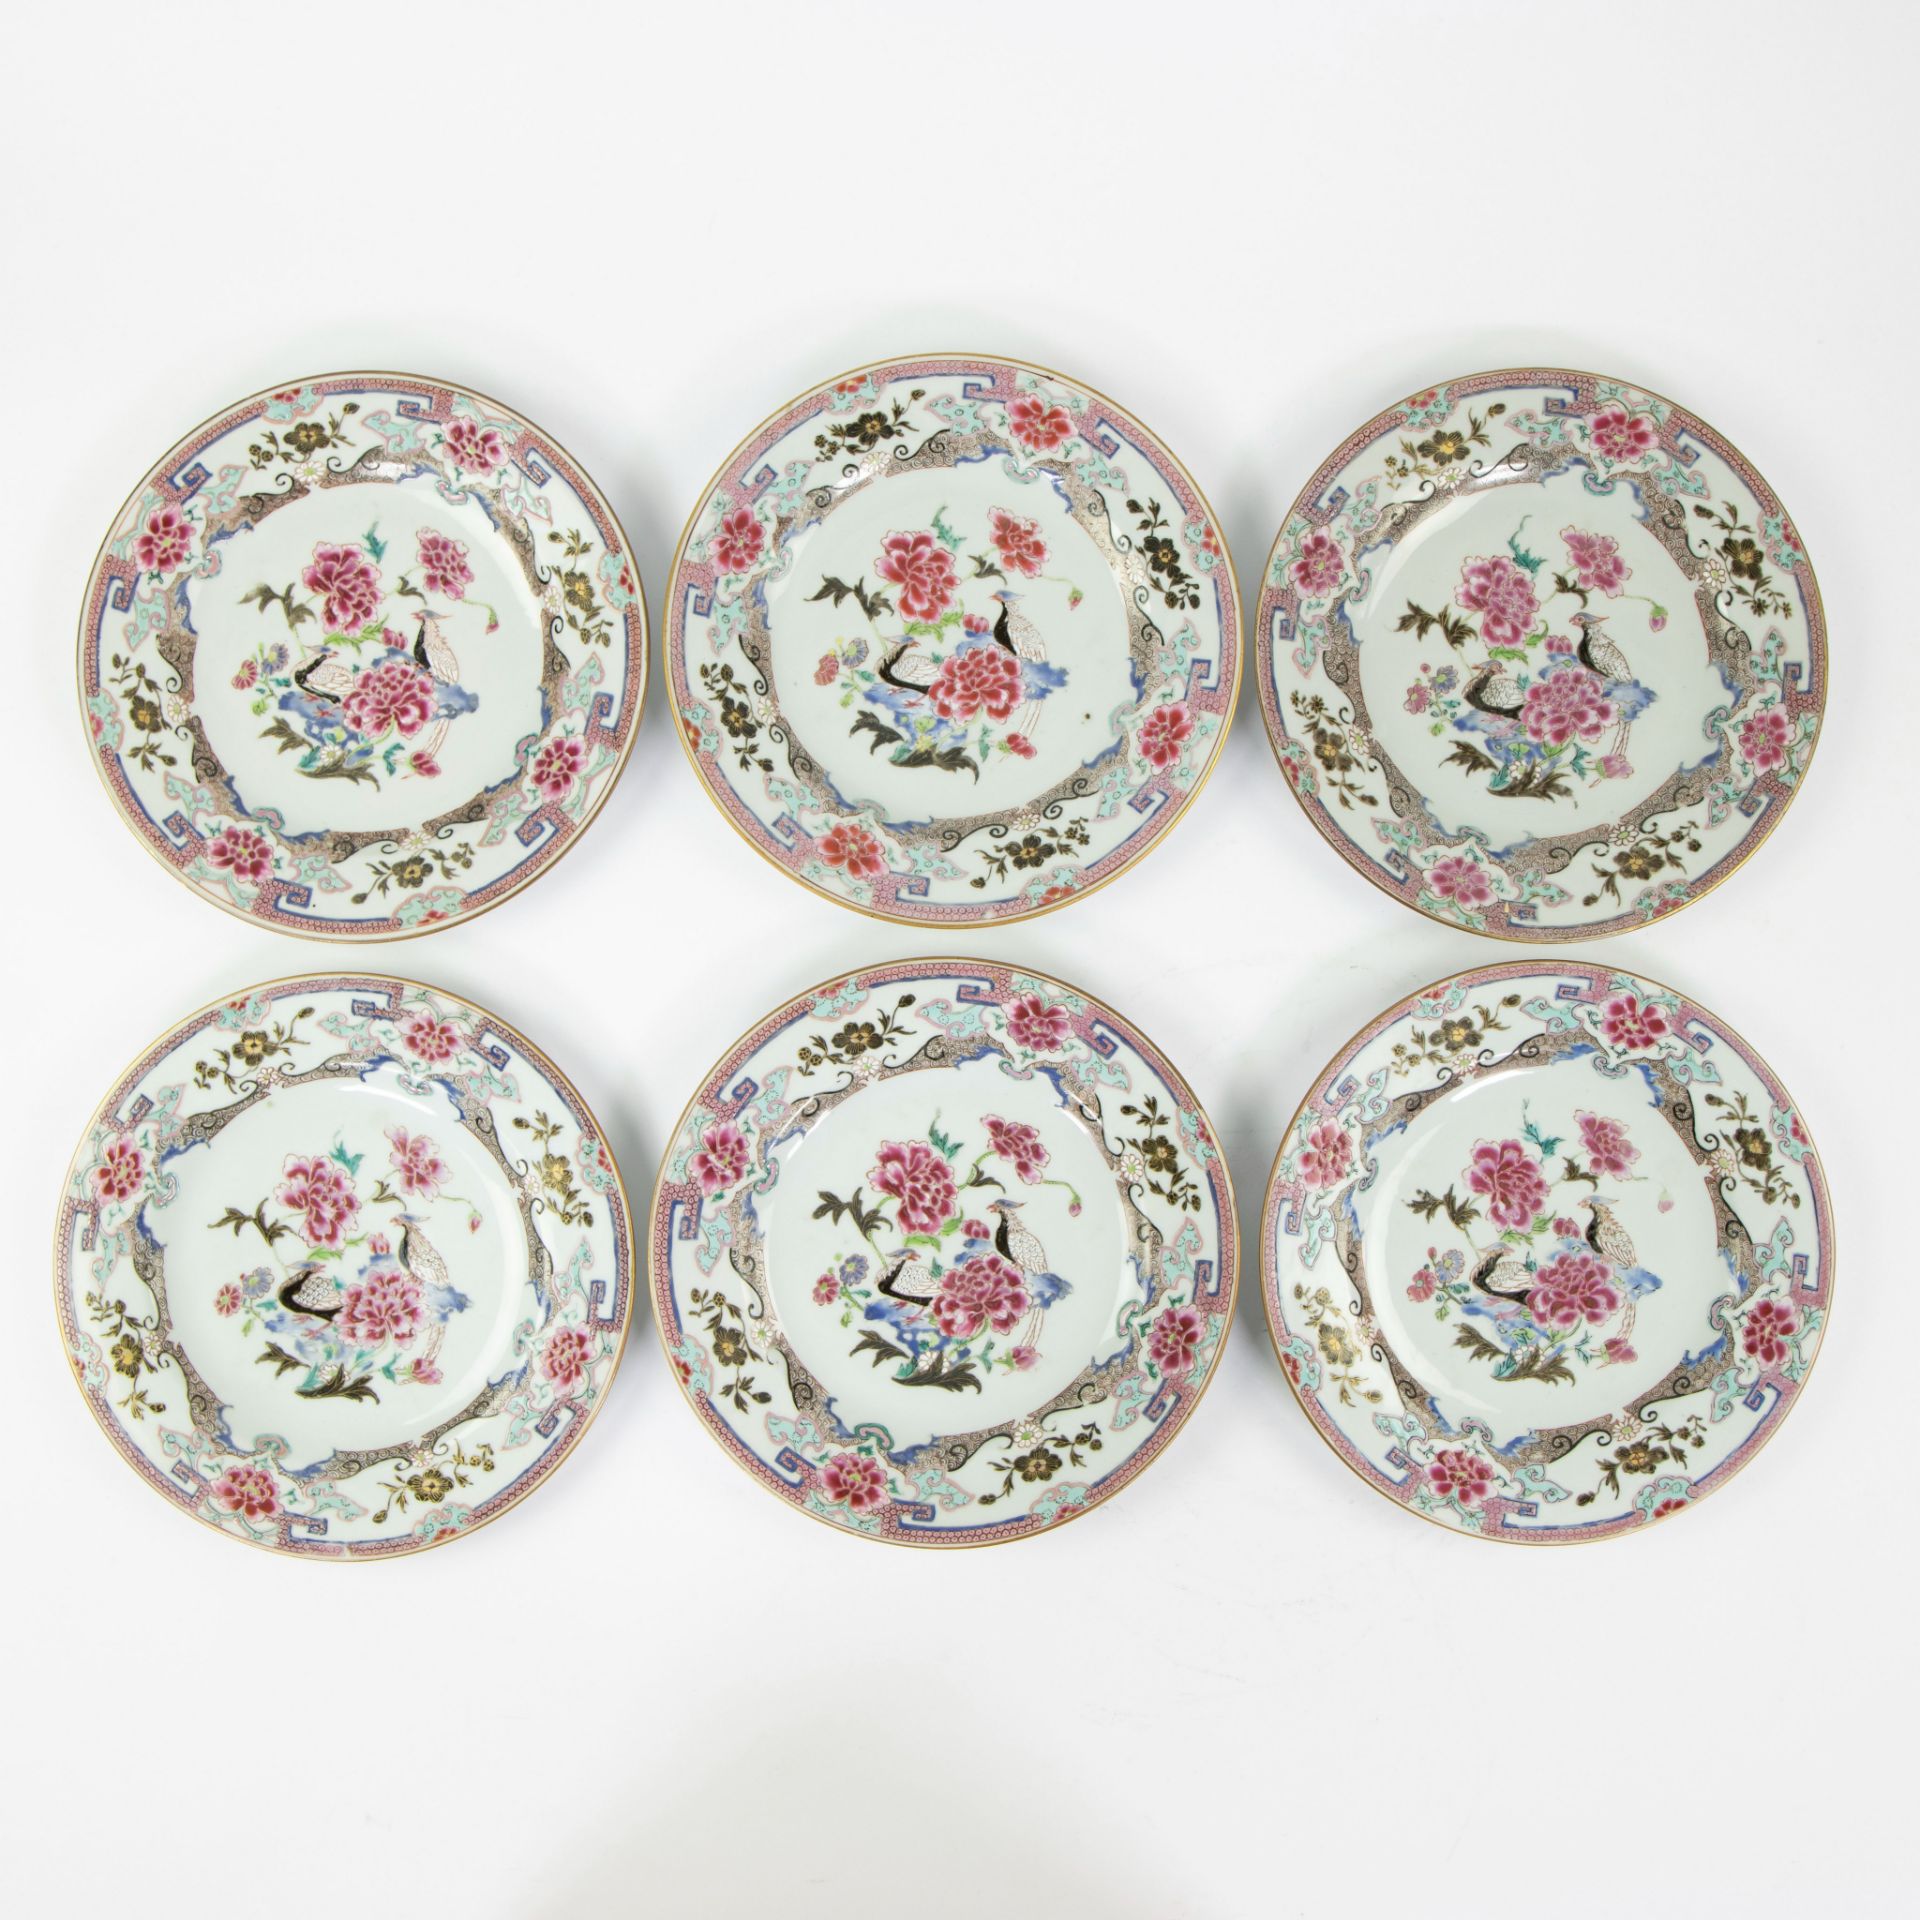 Set of six Chinese porcelain famille rose plates with tobacco leaf, peony and pheasant decor. Qianlo